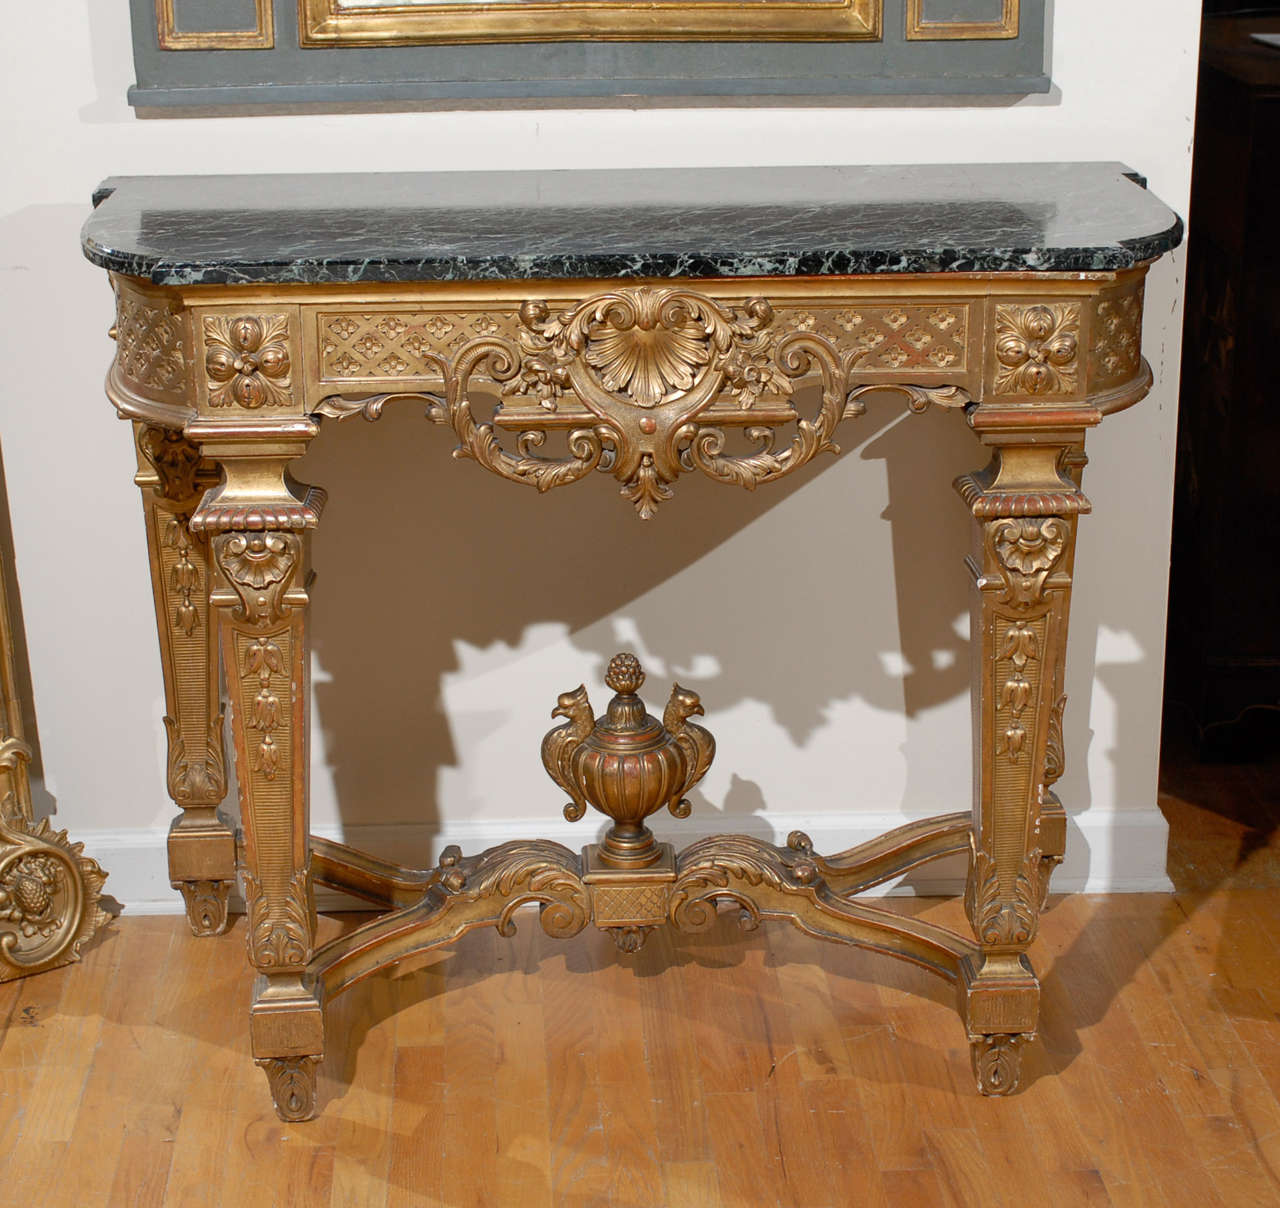 Louis XVI Console, gilt - green marble

A Louis XVI revival style console table, green and black veined conforming marble top,  carved wood and gesso console with a central leaf fan with swags and scrolls,  Carved frieze with diamond and